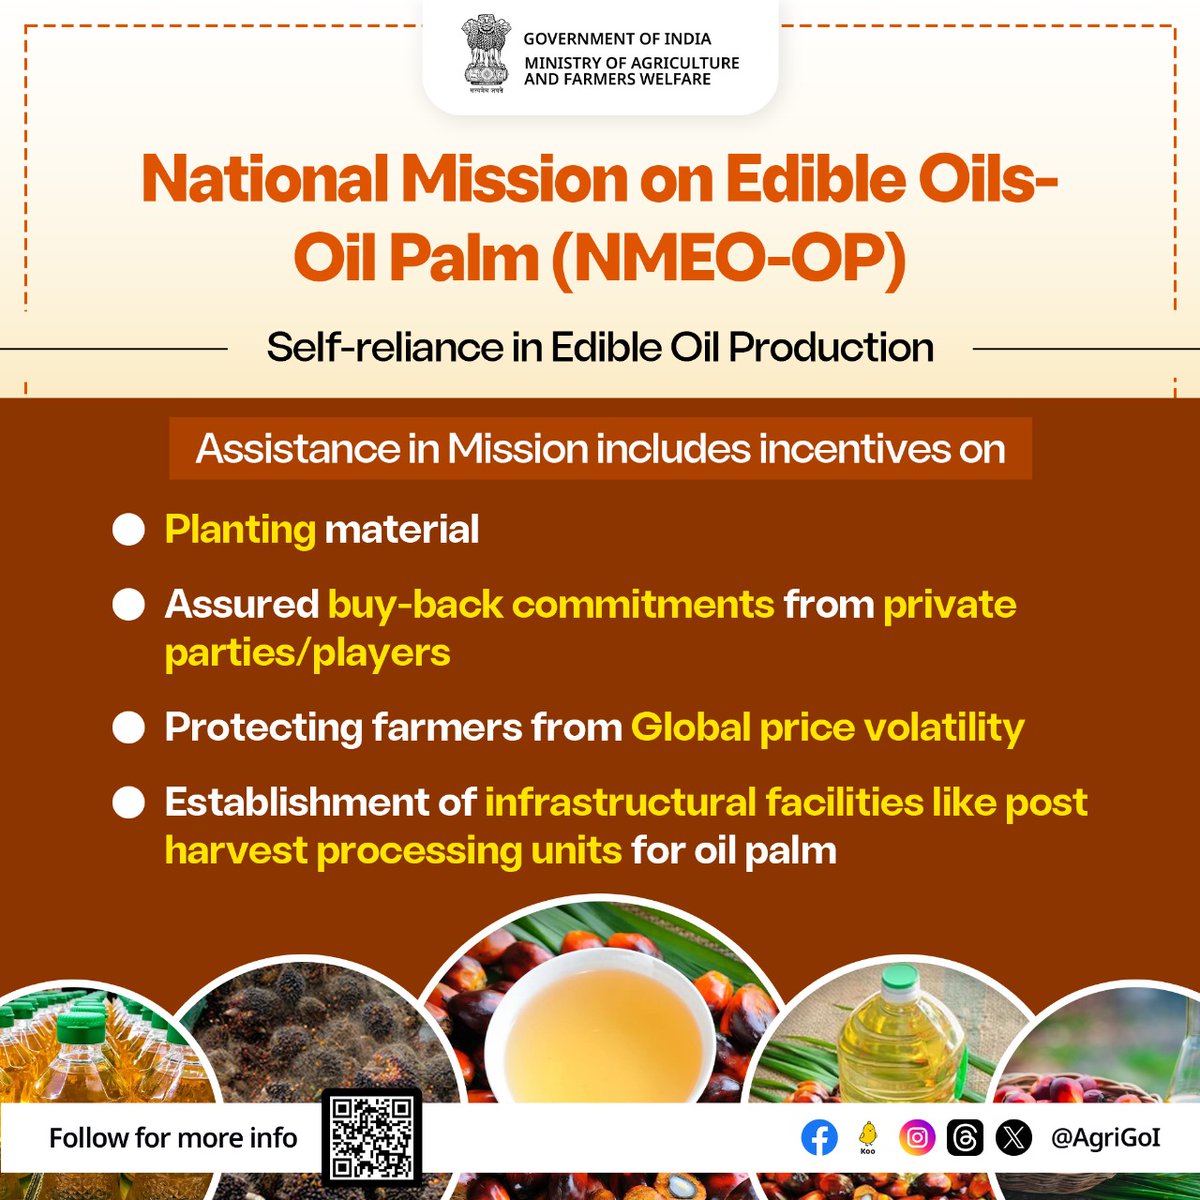 Self-reliance in Edible Oil Production

The assistance provided under the National Mission on Edible Oil - Oil Palm includes incentives, infrastructure development, and technical support aimed at promoting and increasing oil palm cultivation nationwide.
#agrigoi #NMEO_OP #oilpalm